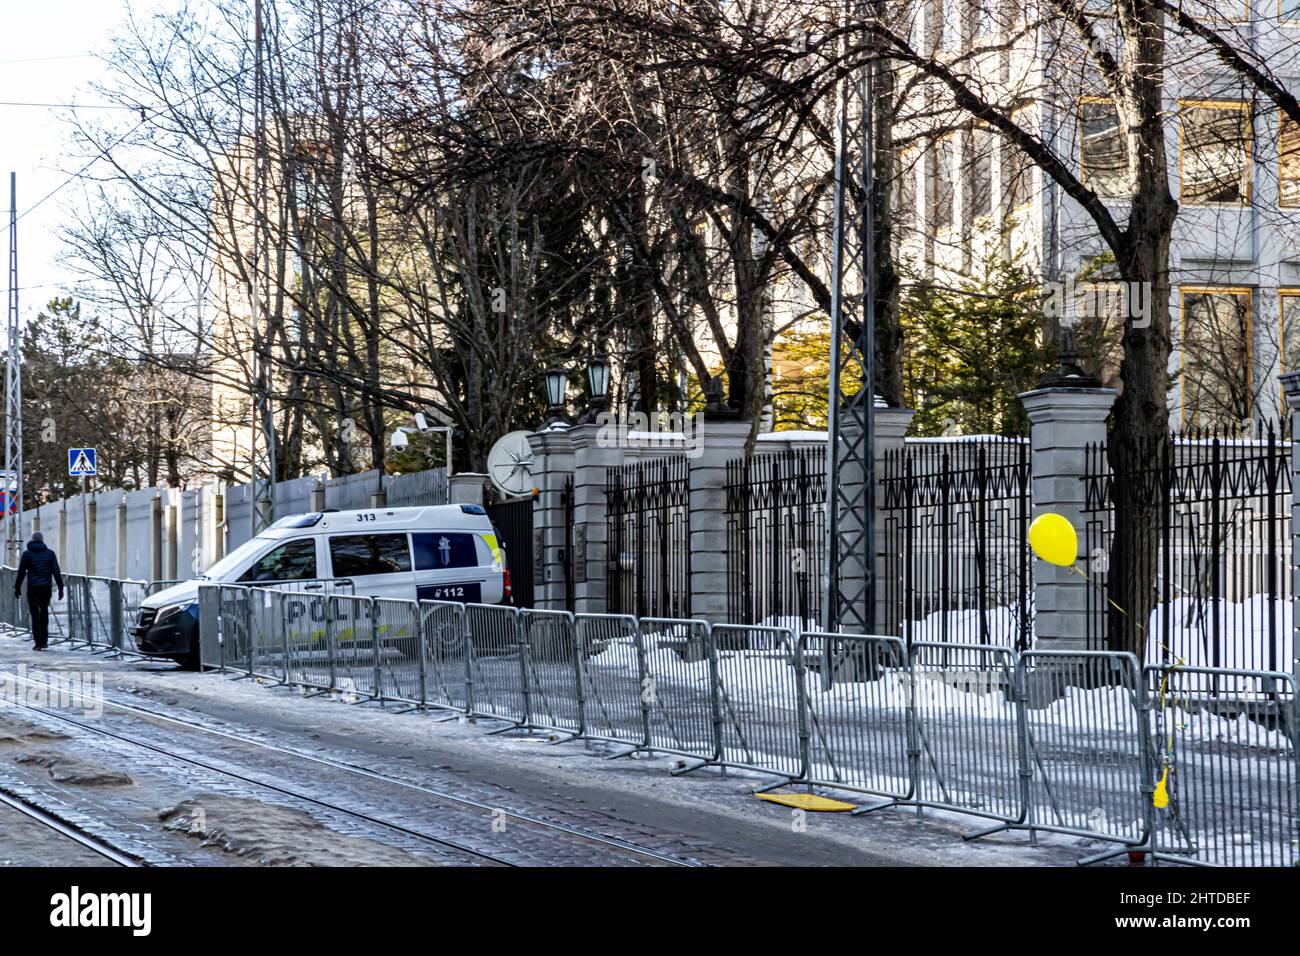 Police officers in a van guarding the embassy of the Russian Federation in Helsinki, Finland, during the 2022 Russian invasion of Ukraine. Stock Photo